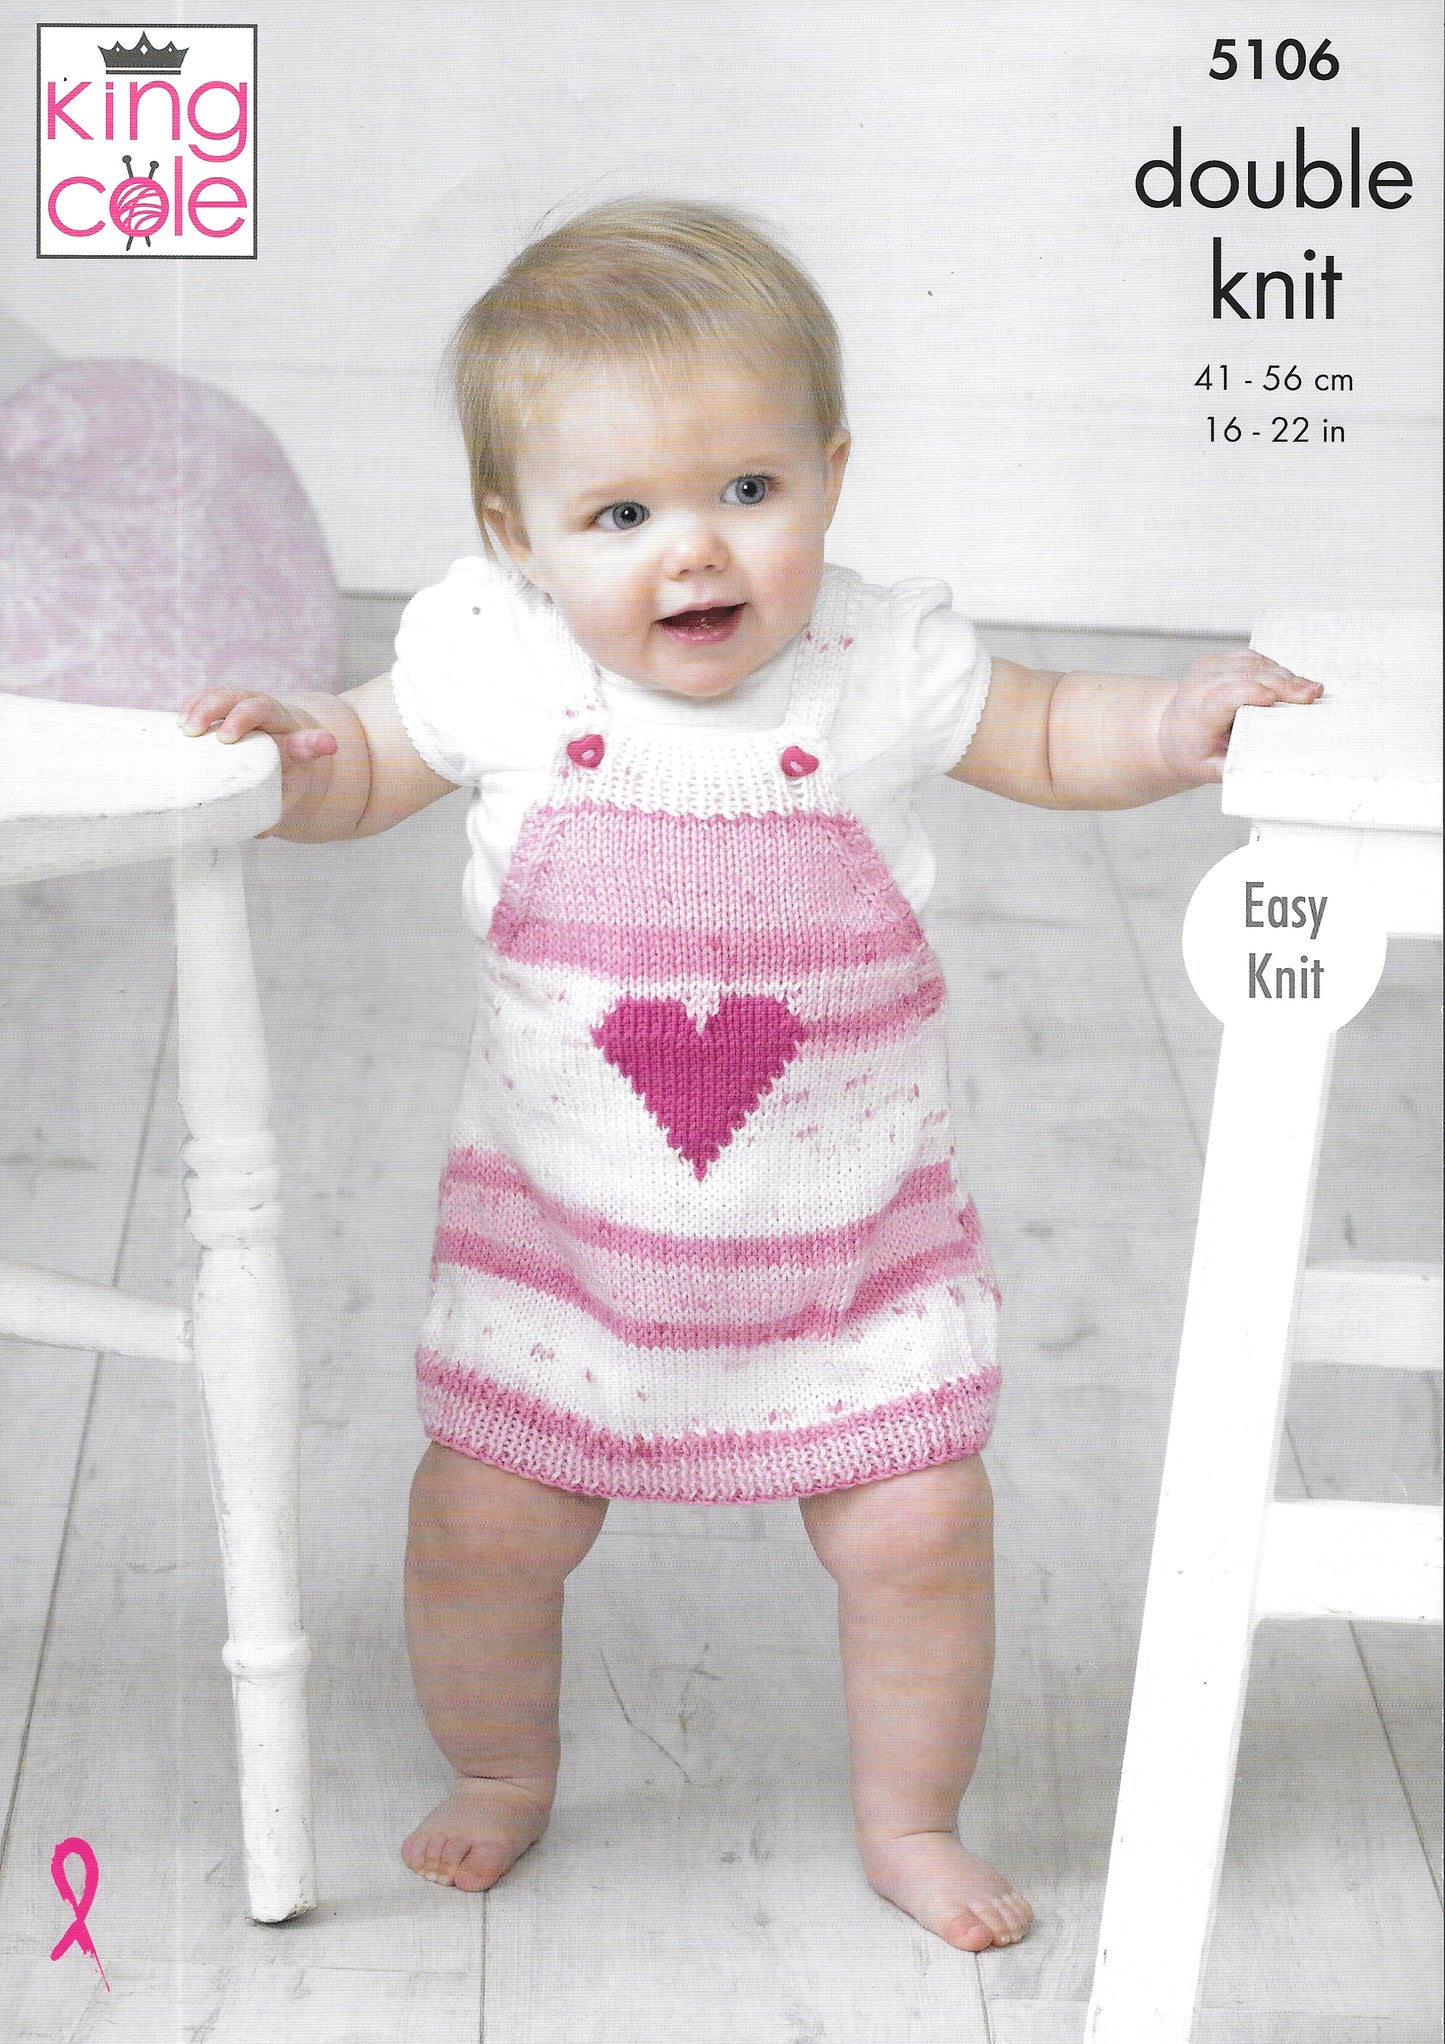 5106 King Cole double knit Baby Pinafores knitting pattern